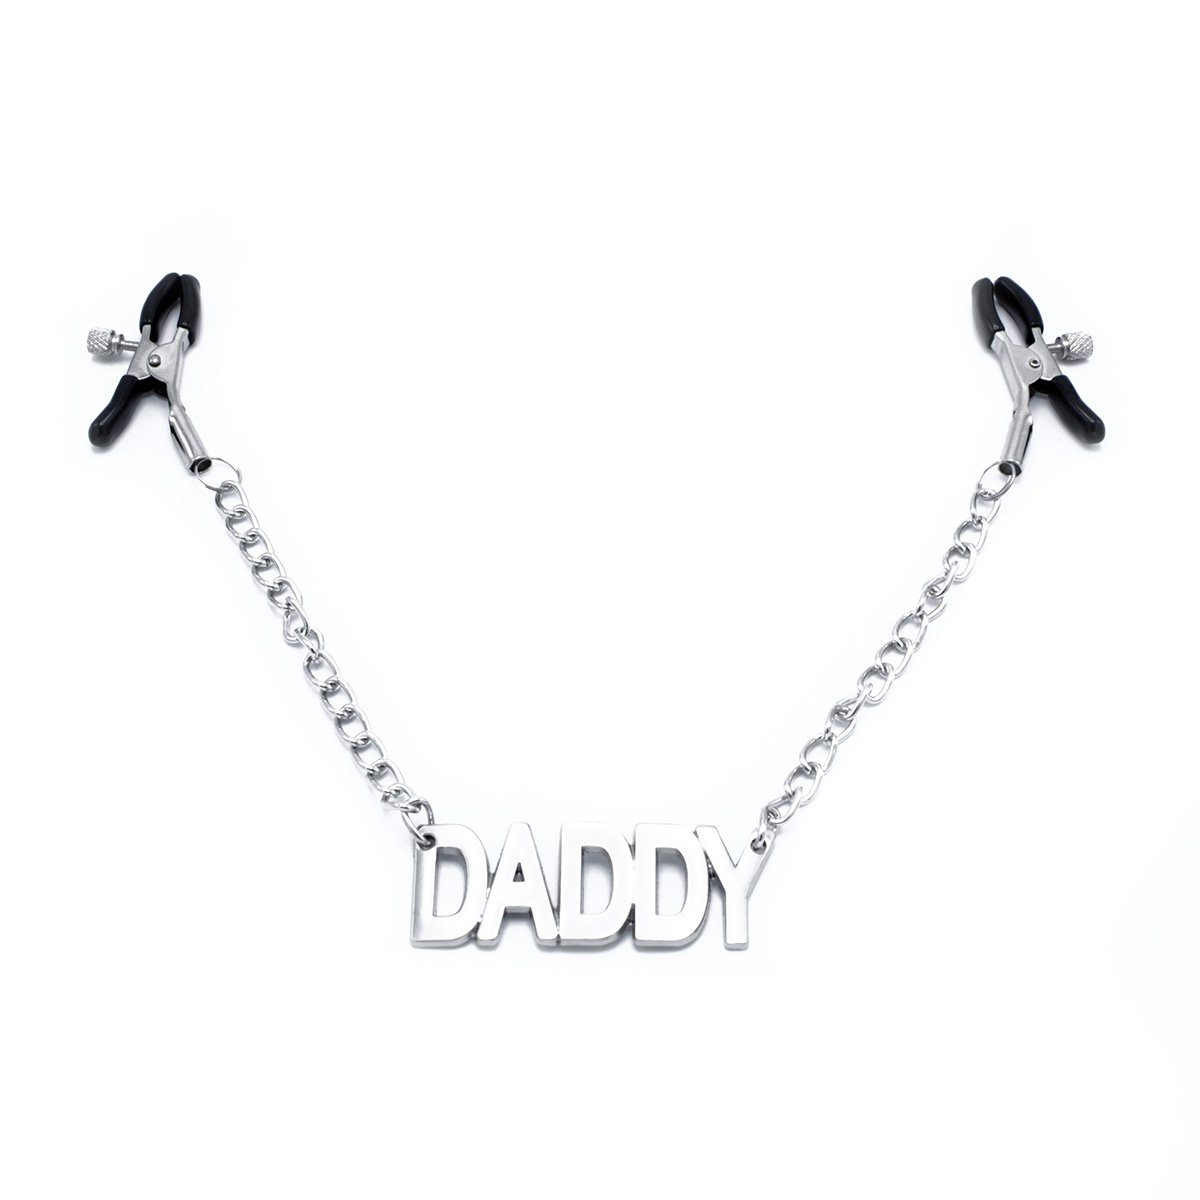 KIOTOS Nippelklemme Nipple Clamps (DADDY), Kette mit